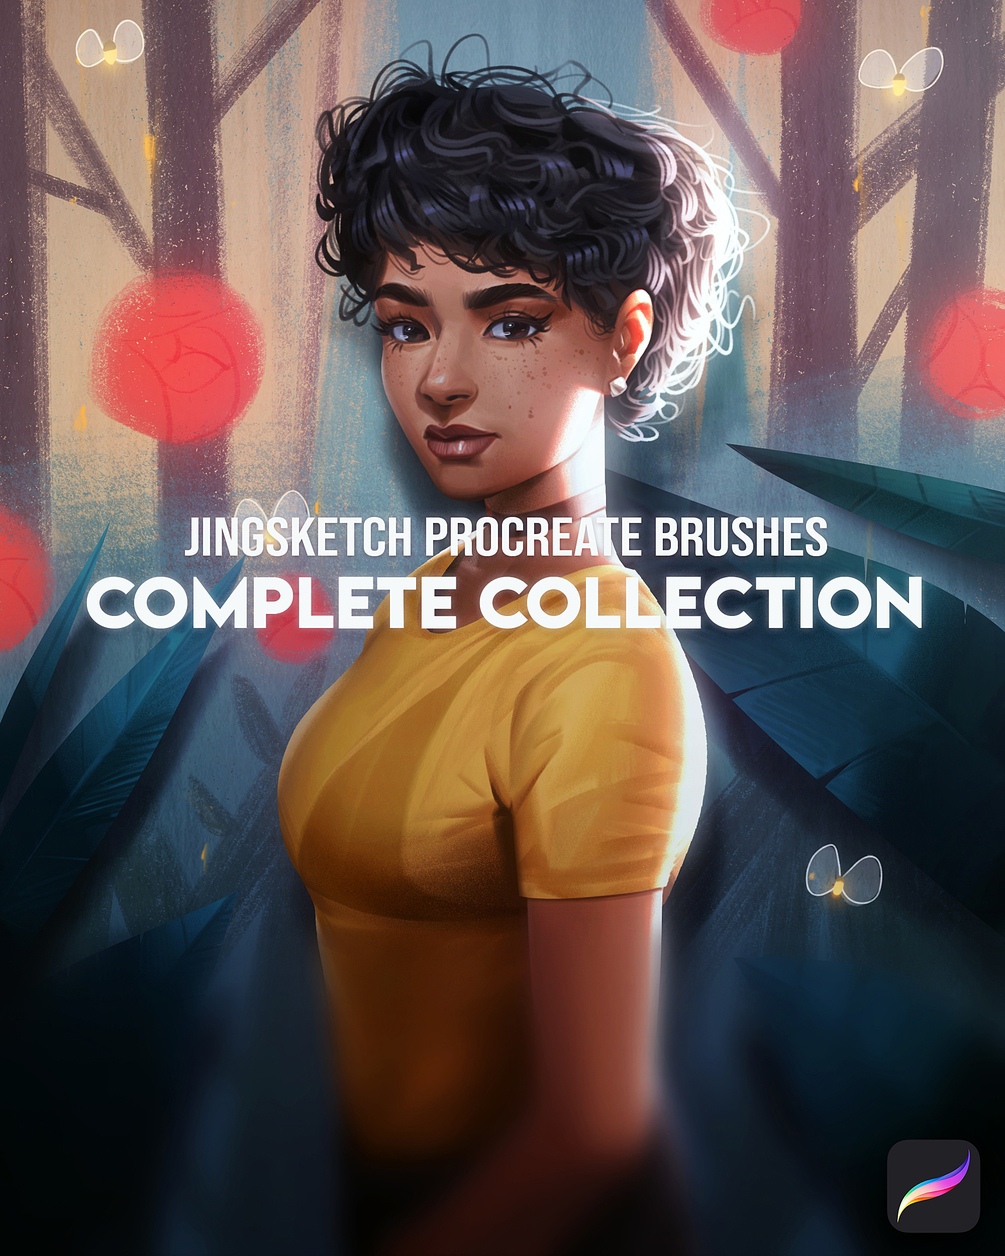 Jingsketch_Procreate_Brushes_-_Complete_Collection